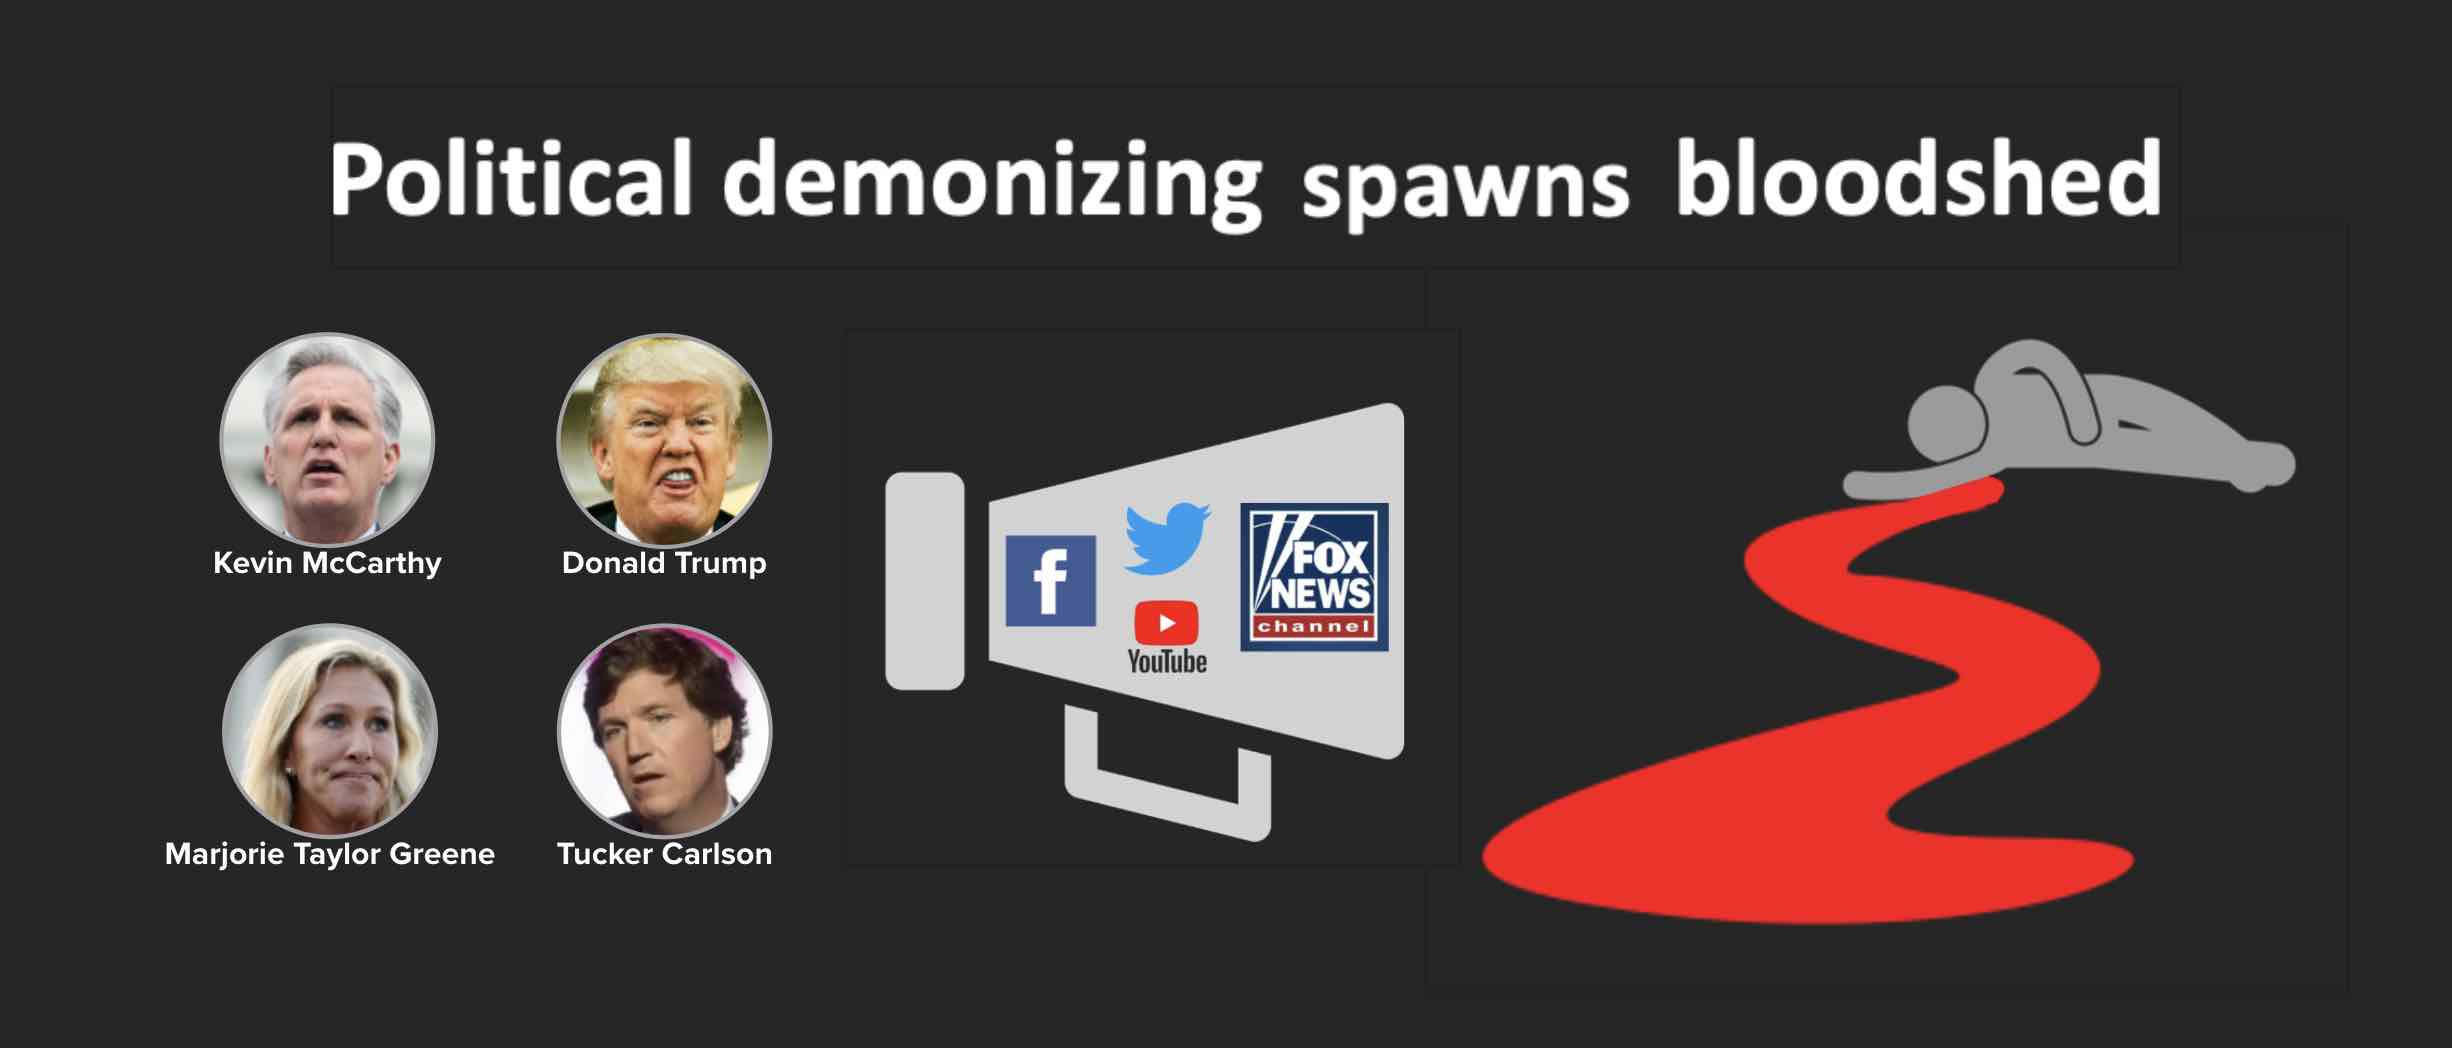 Political demonizing spawns bloodshed. Facebook, FOX News, YouTube and Twitter amplify the hate.